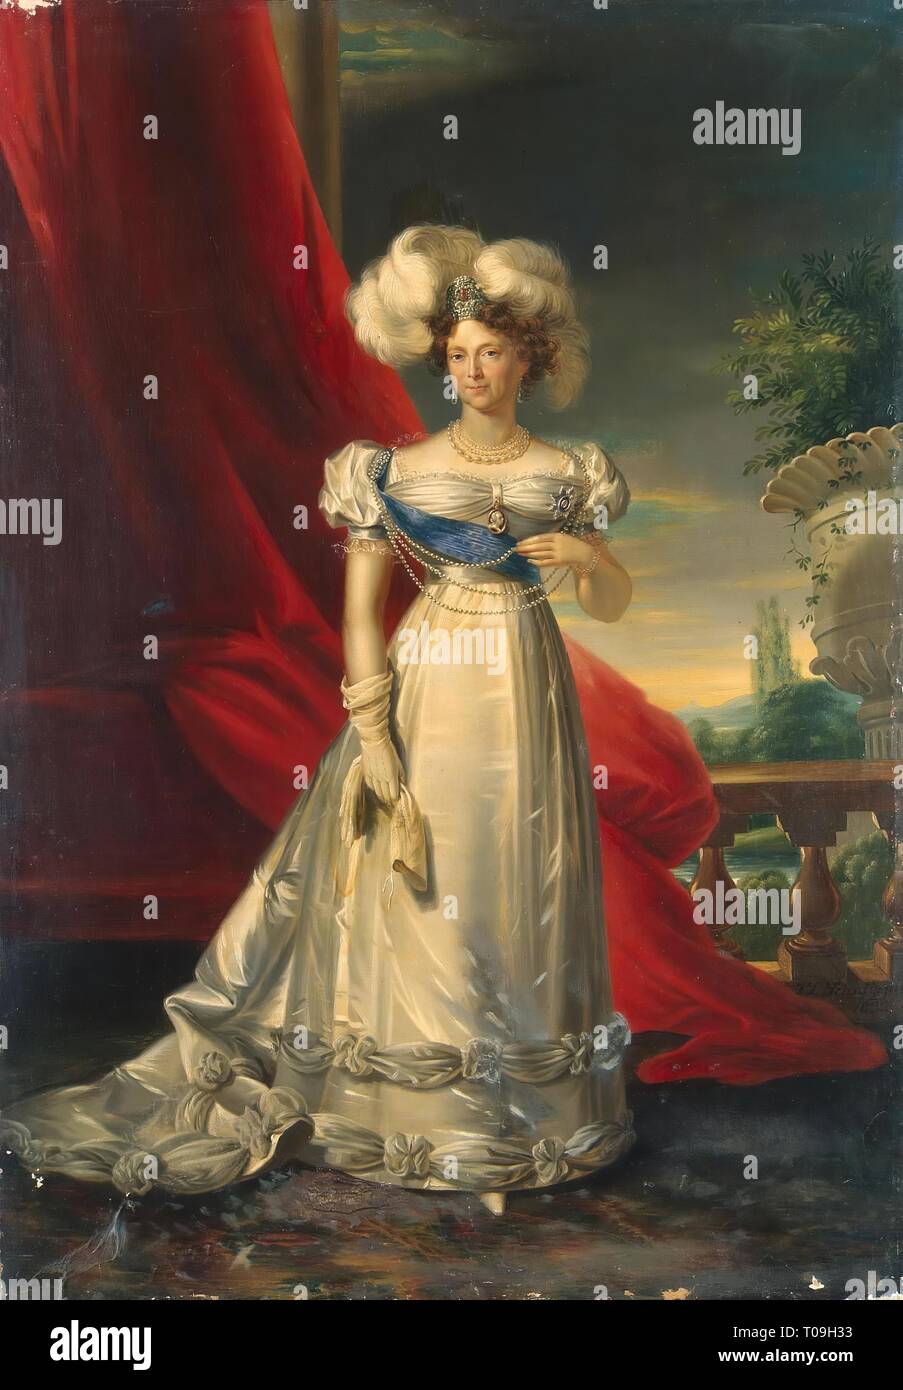 'Portrait of Empress Maria Fiodorovna'. Russia, 1832. Dimensions: 90x63 cm. Museum: State Hermitage, St. Petersburg. Author: Ludwig Schultz. Stock Photo